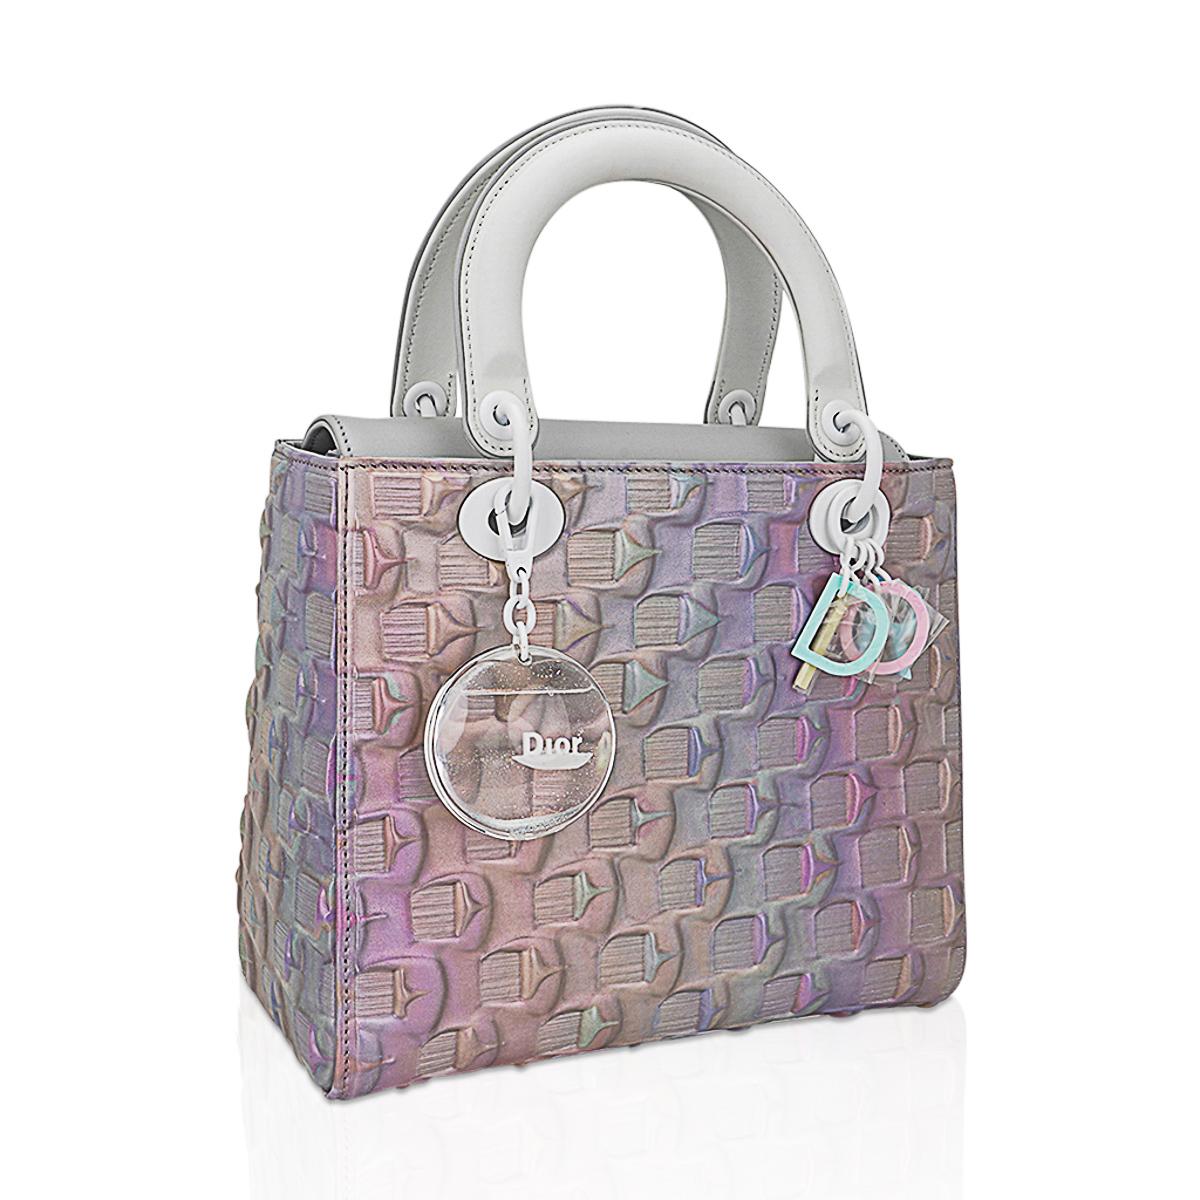 Mightychic offers a Christian 6th Edition Dior Lady Art bag featured in softly irridescent pastels ivoking the natural movement of the sea.
Designed by Daisuke Ohba as part of a collaboration between Dior and 12 artists to mark the release of the